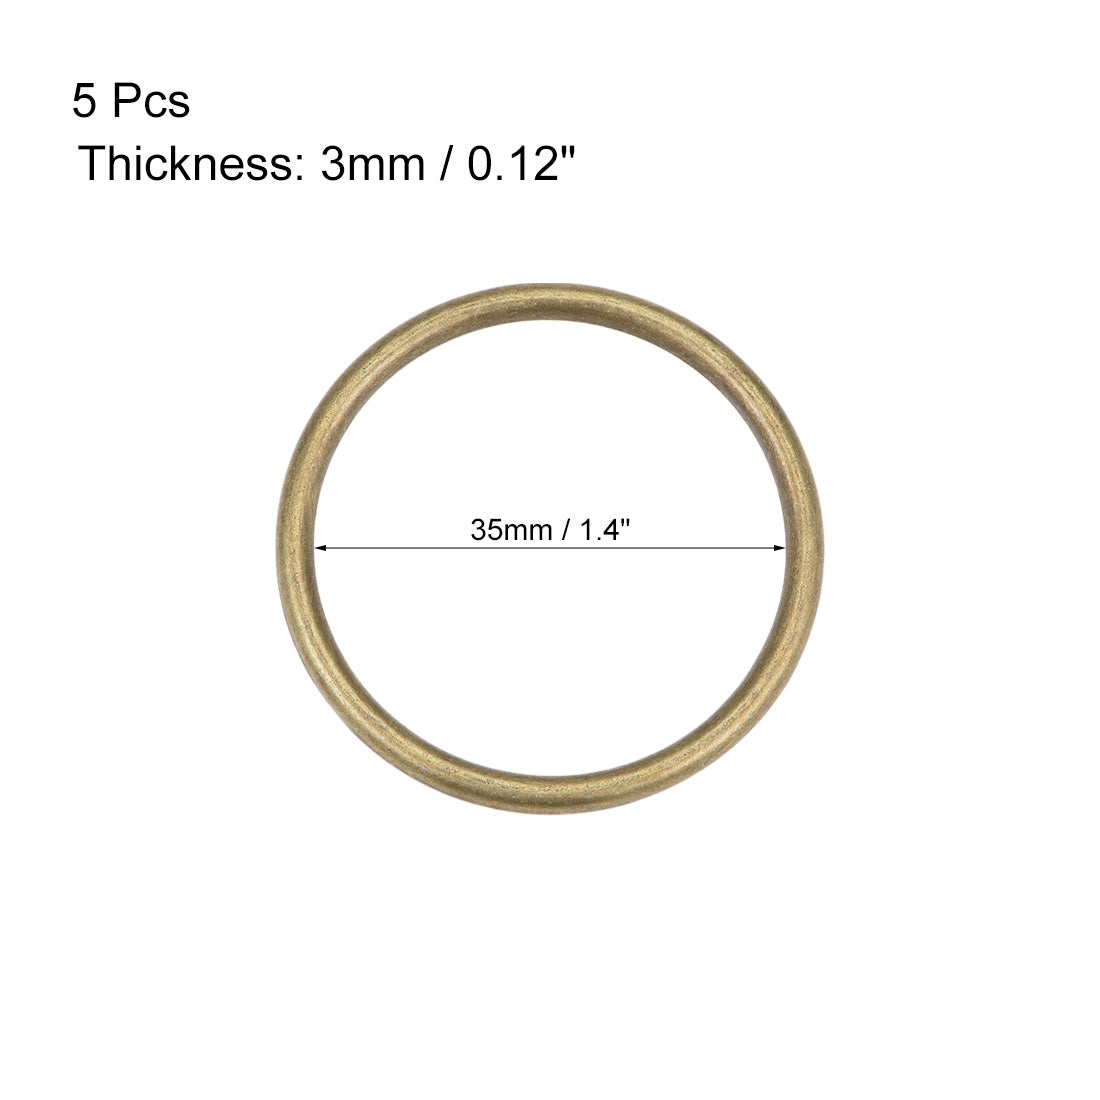 uxcell Uxcell O Ring Buckle 35mm(1.4") ID 3mm Thickness Zinc Alloy O-Rings for Hardware Bags Belts Craft DIY Accessories, Bronze Tone 5pcs